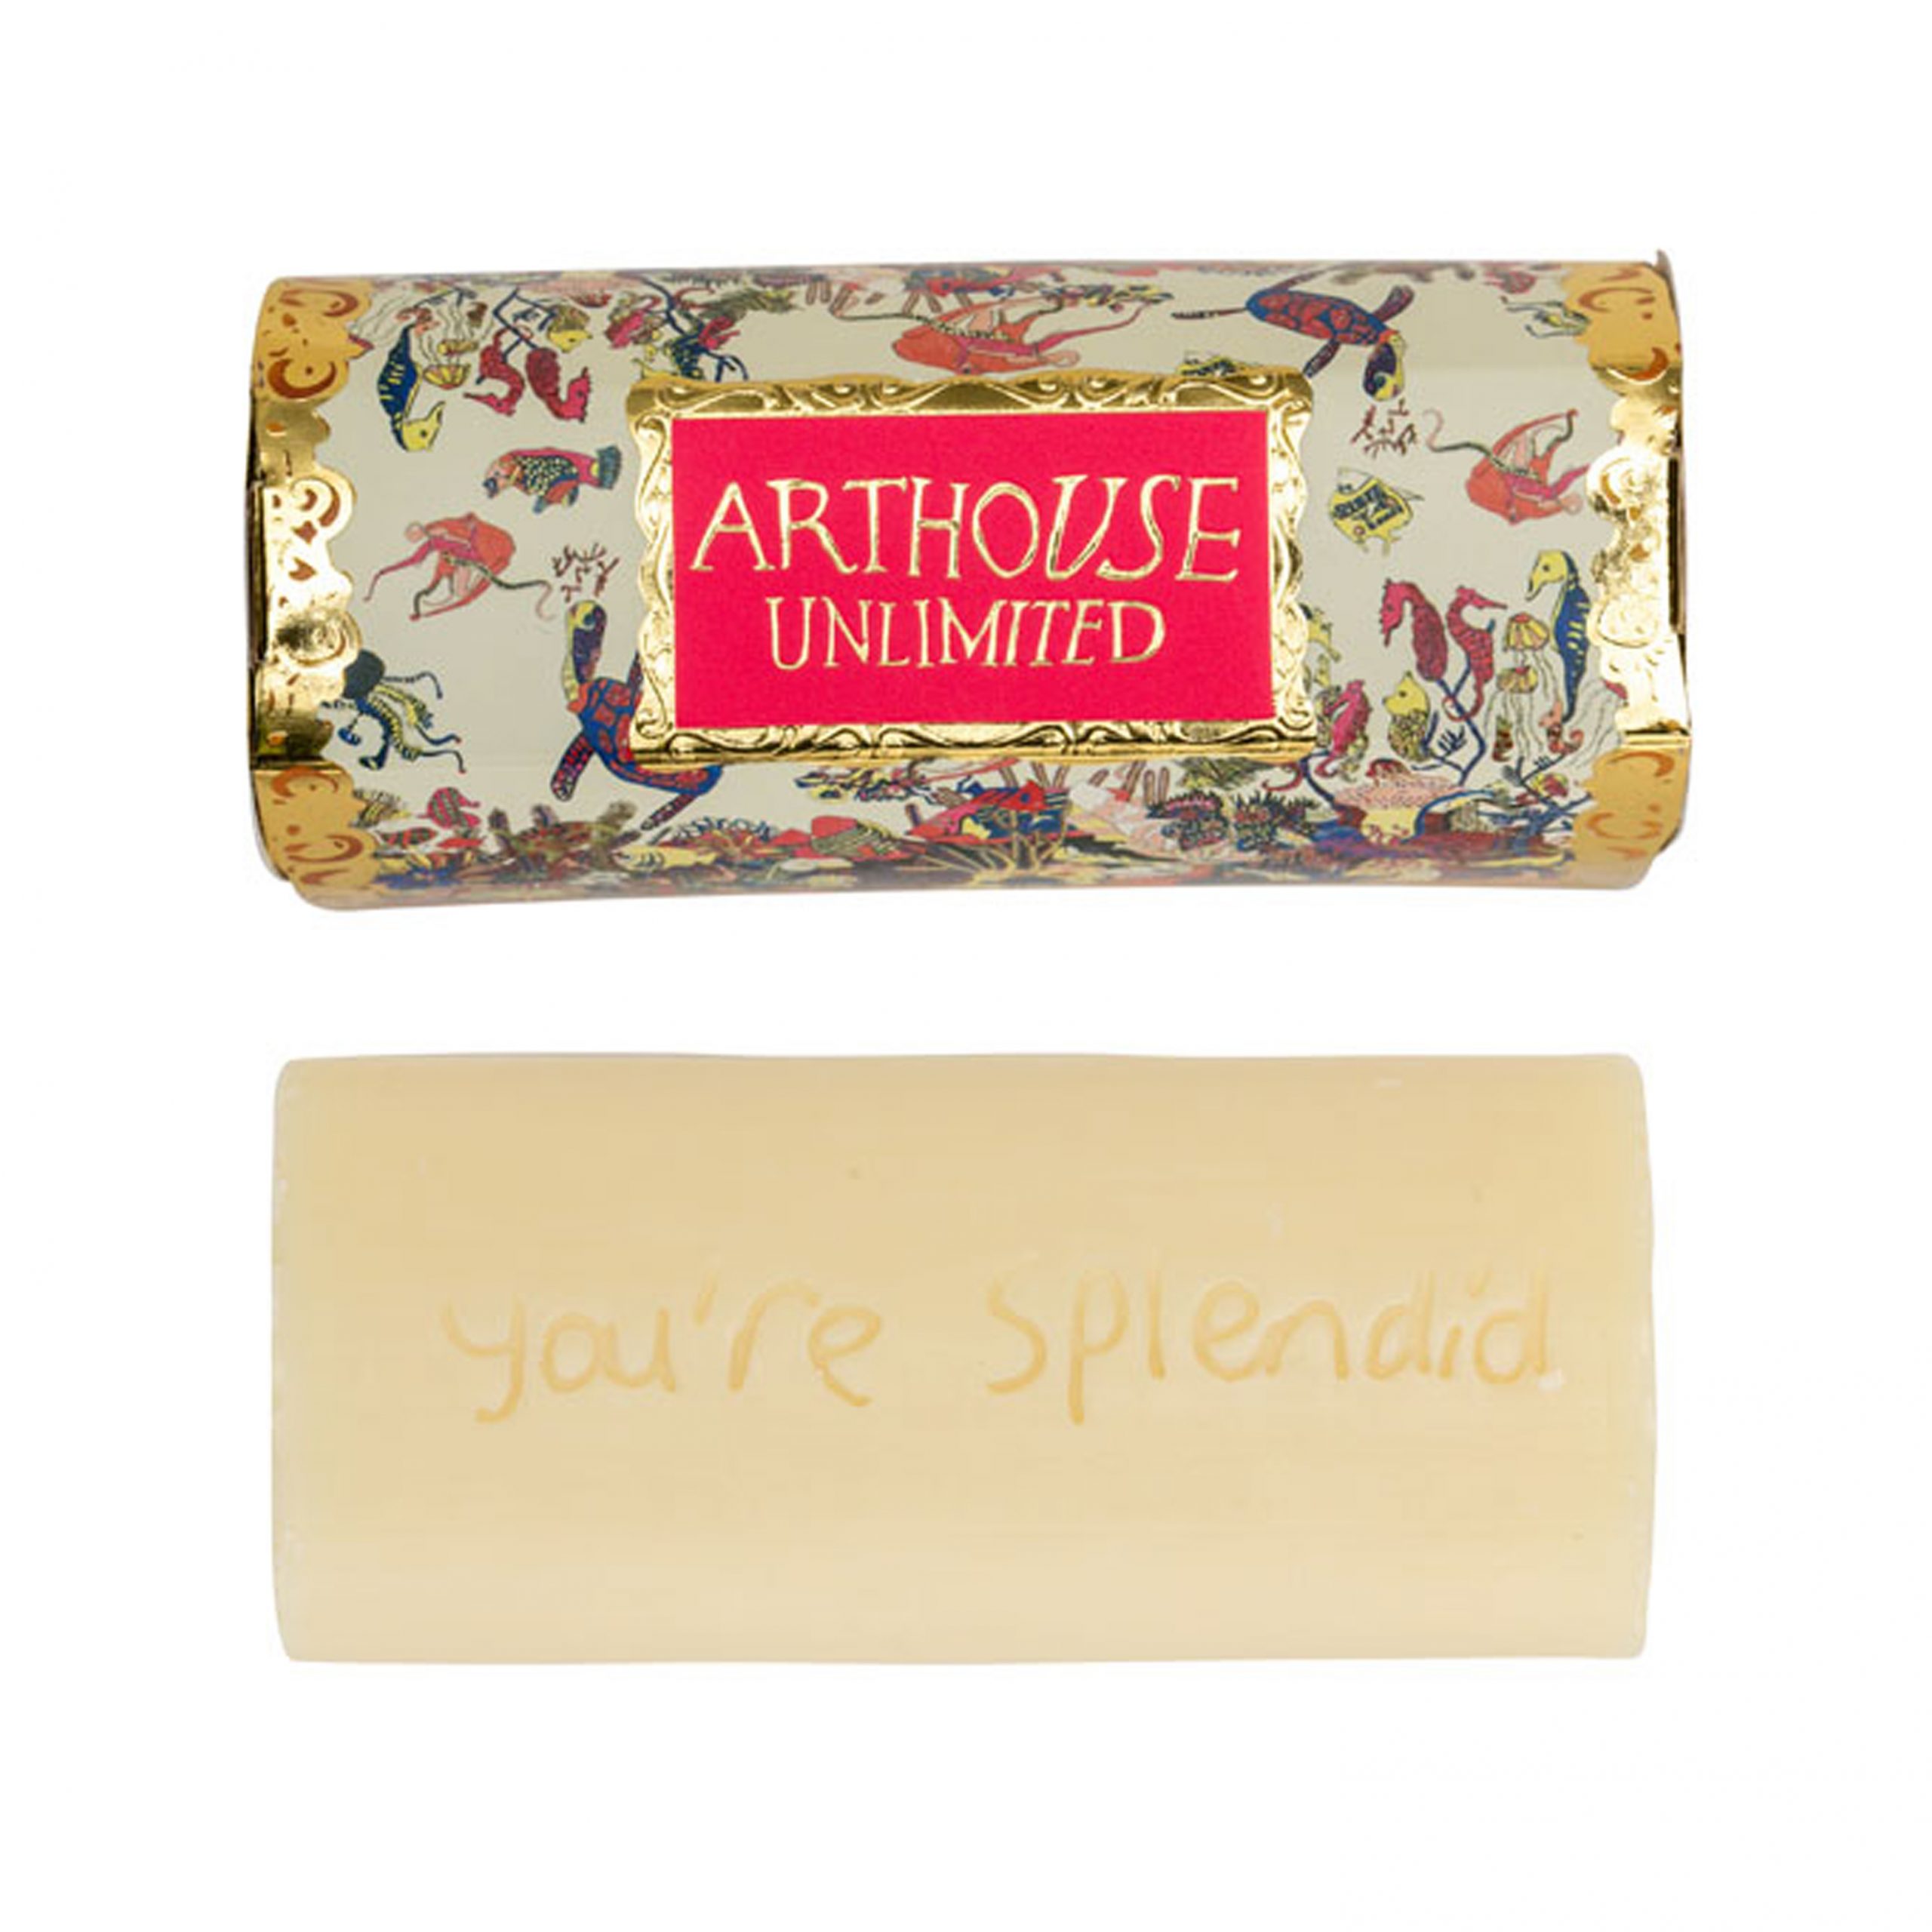 arthouse-unlimited-angels-of-the-deep-organic-soap